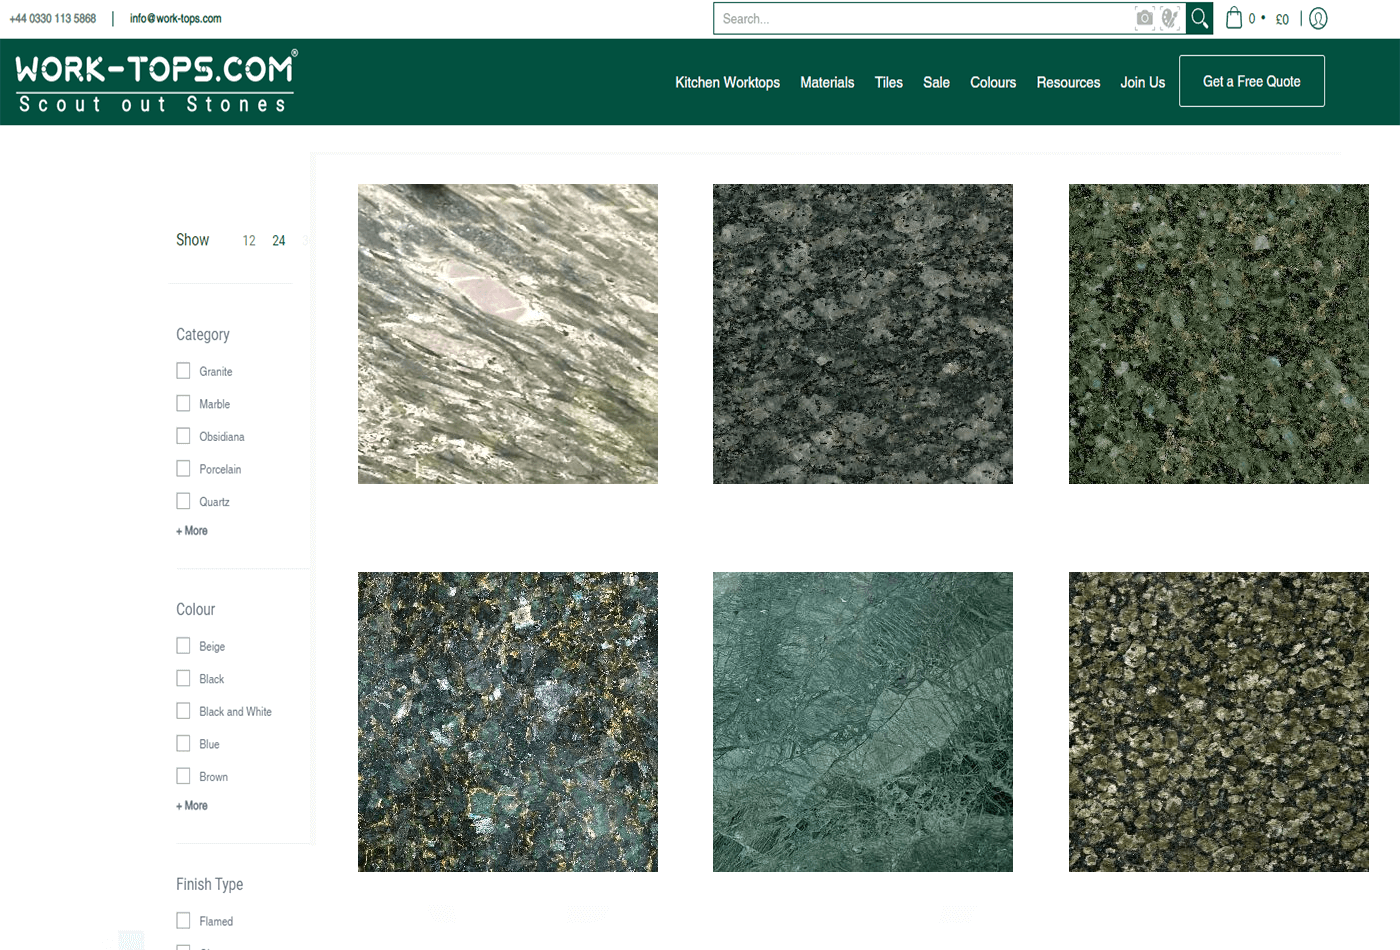 Choose from this Wide Range of Green Stones